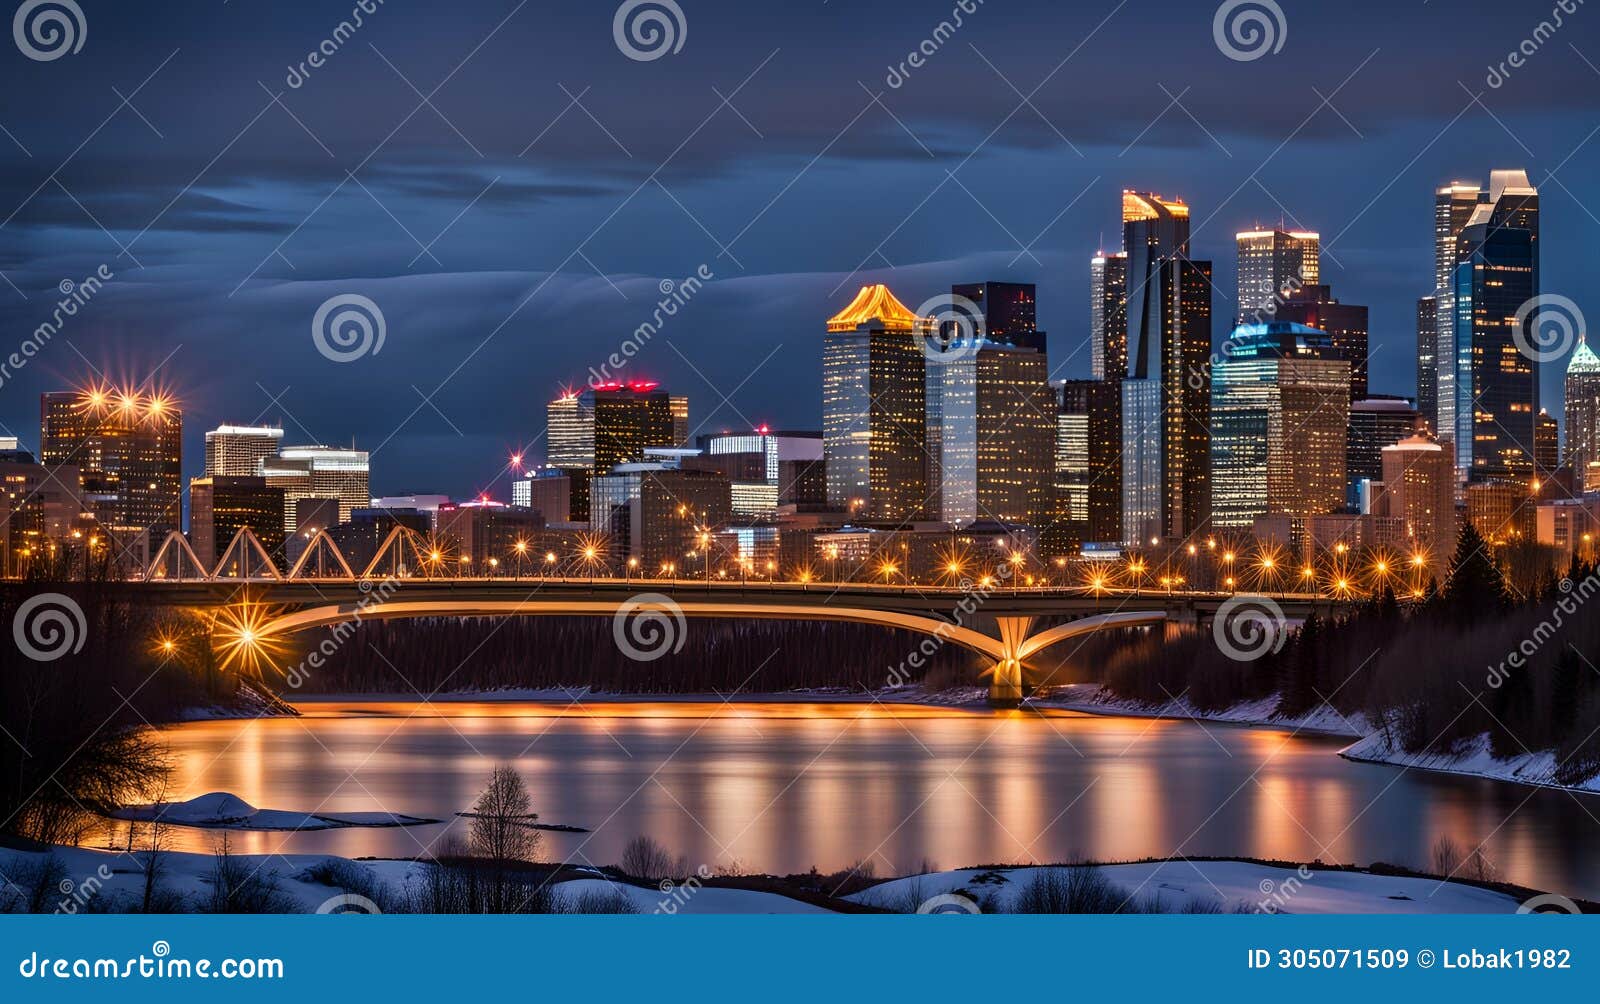 calgary skyline at night with bow river and centre street bridge